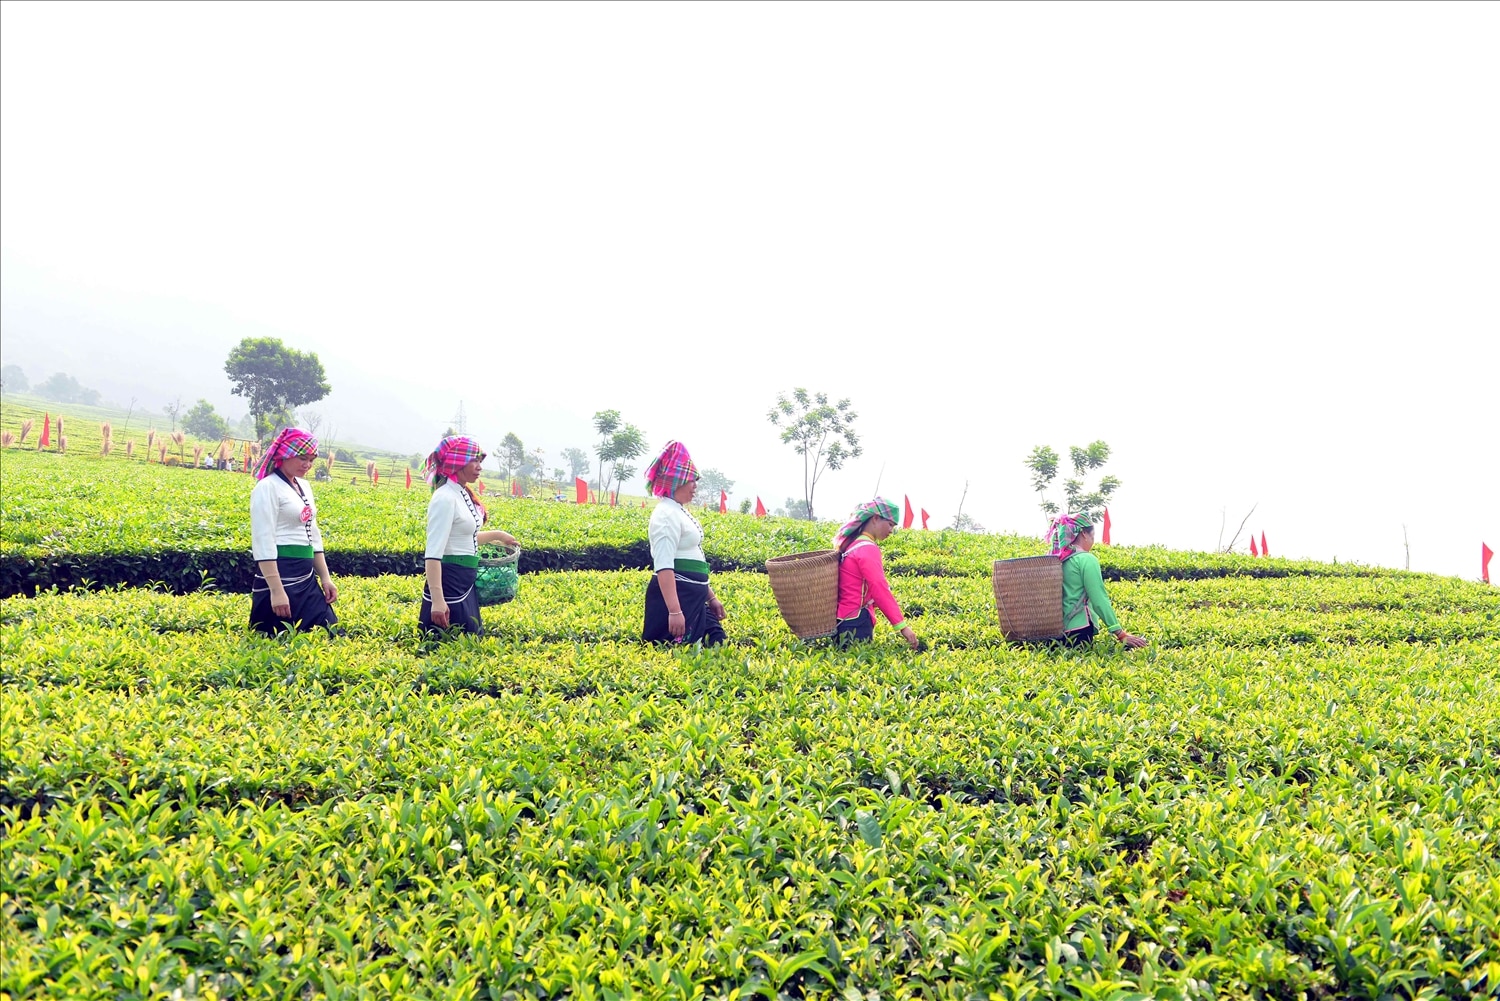 Contestants can only pick tea in their row, using only two hands and not sickles, knives, or machines to pick tea.